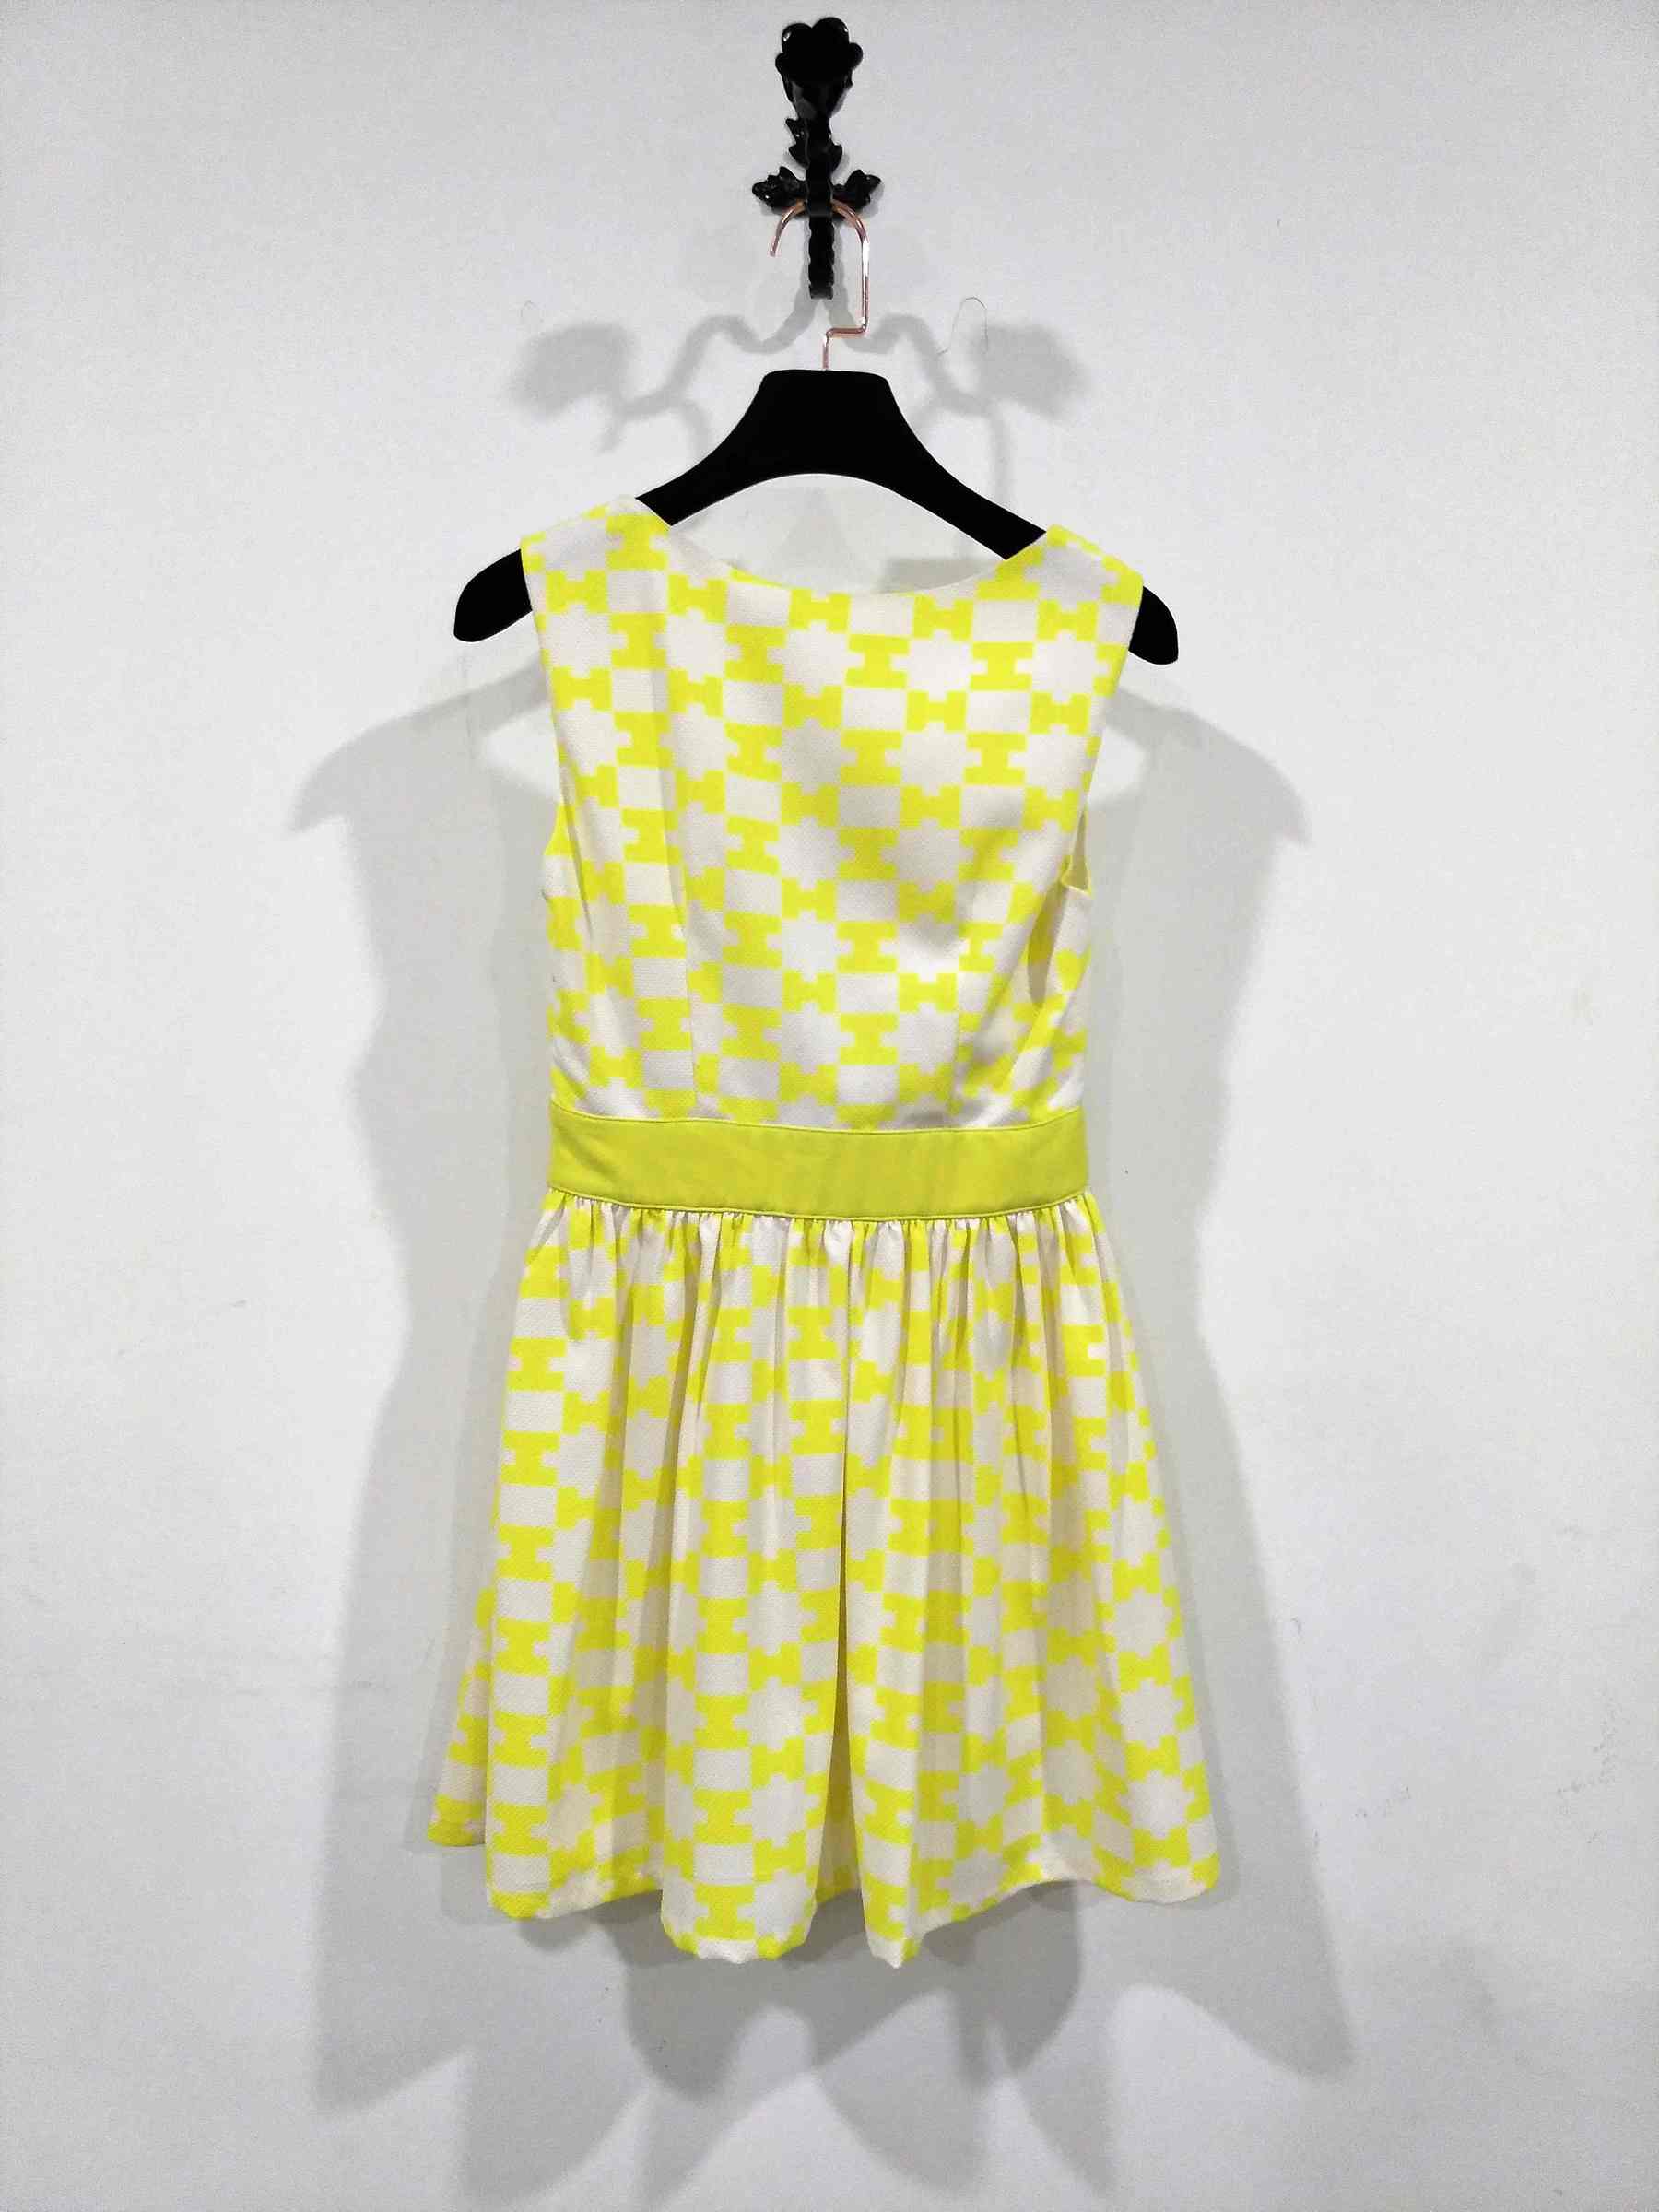 Yellow Jacquard dress design summer spring woman with Ruffle dress ladies for Yellow pleat dress mature clothing (8).jpg